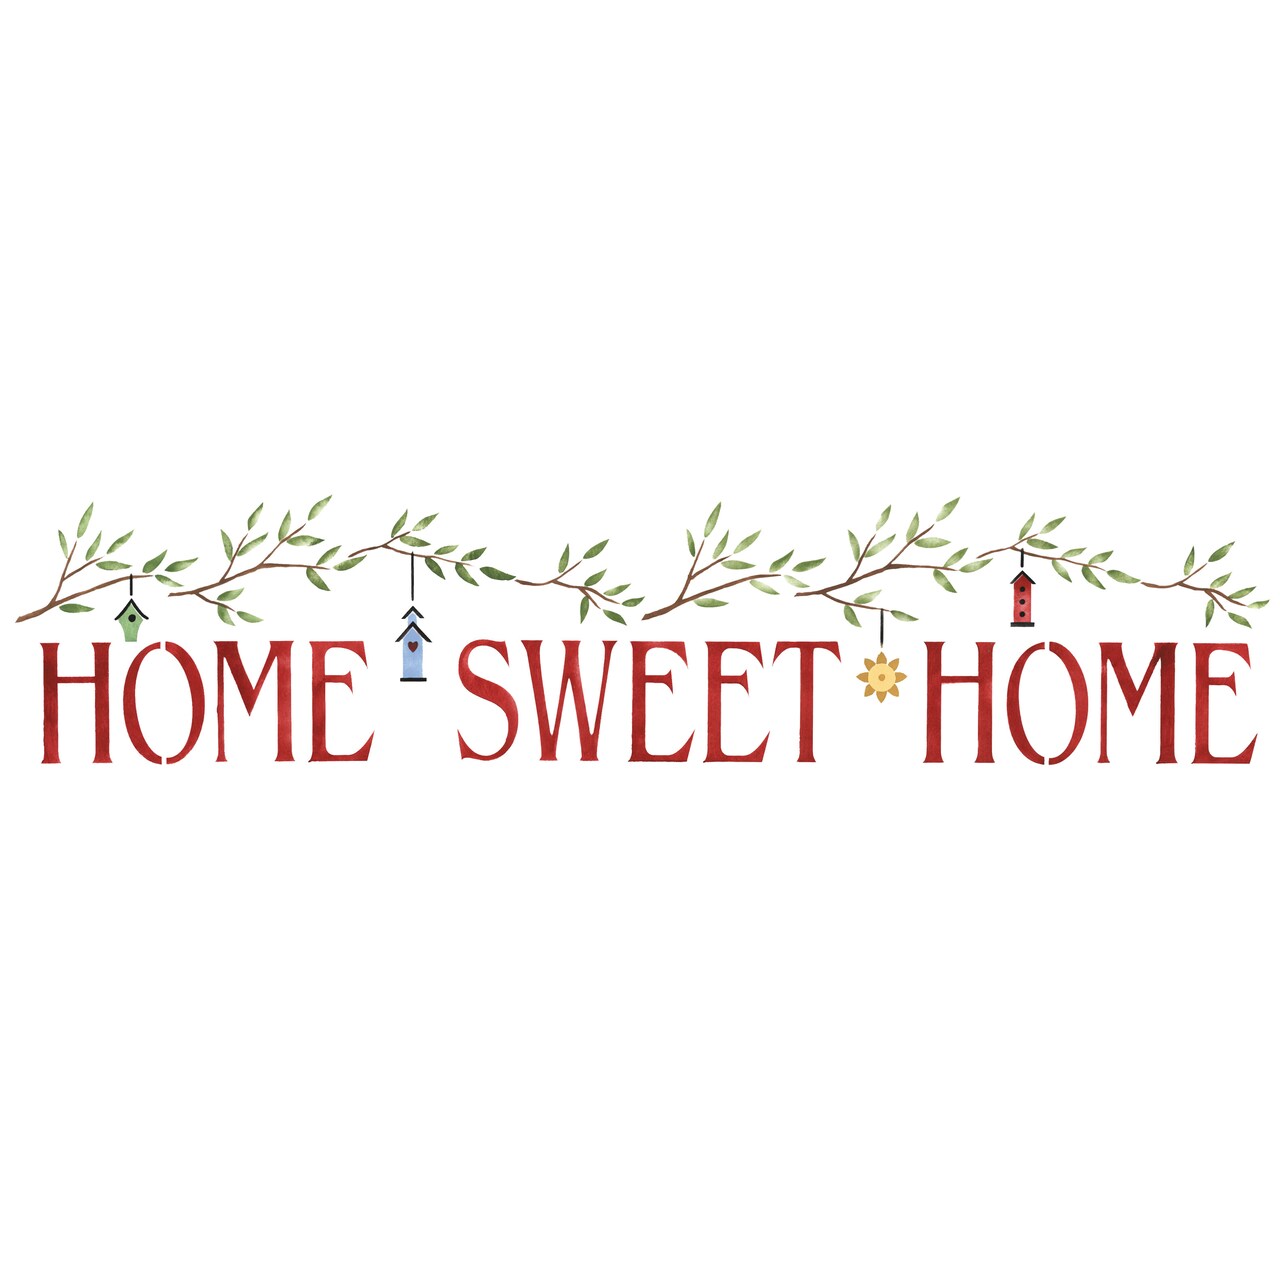 Home Sweet Home Wall Lettering Stencil | 3104 by Designer Stencils | Word &#x26; Phrase Stencils | Reusable Art Craft Stencils for Painting on Walls, Canvas, Wood | Reusable Plastic Paint Stencil for Home Makeover | Easy to Use &#x26; Clean Art Stencil